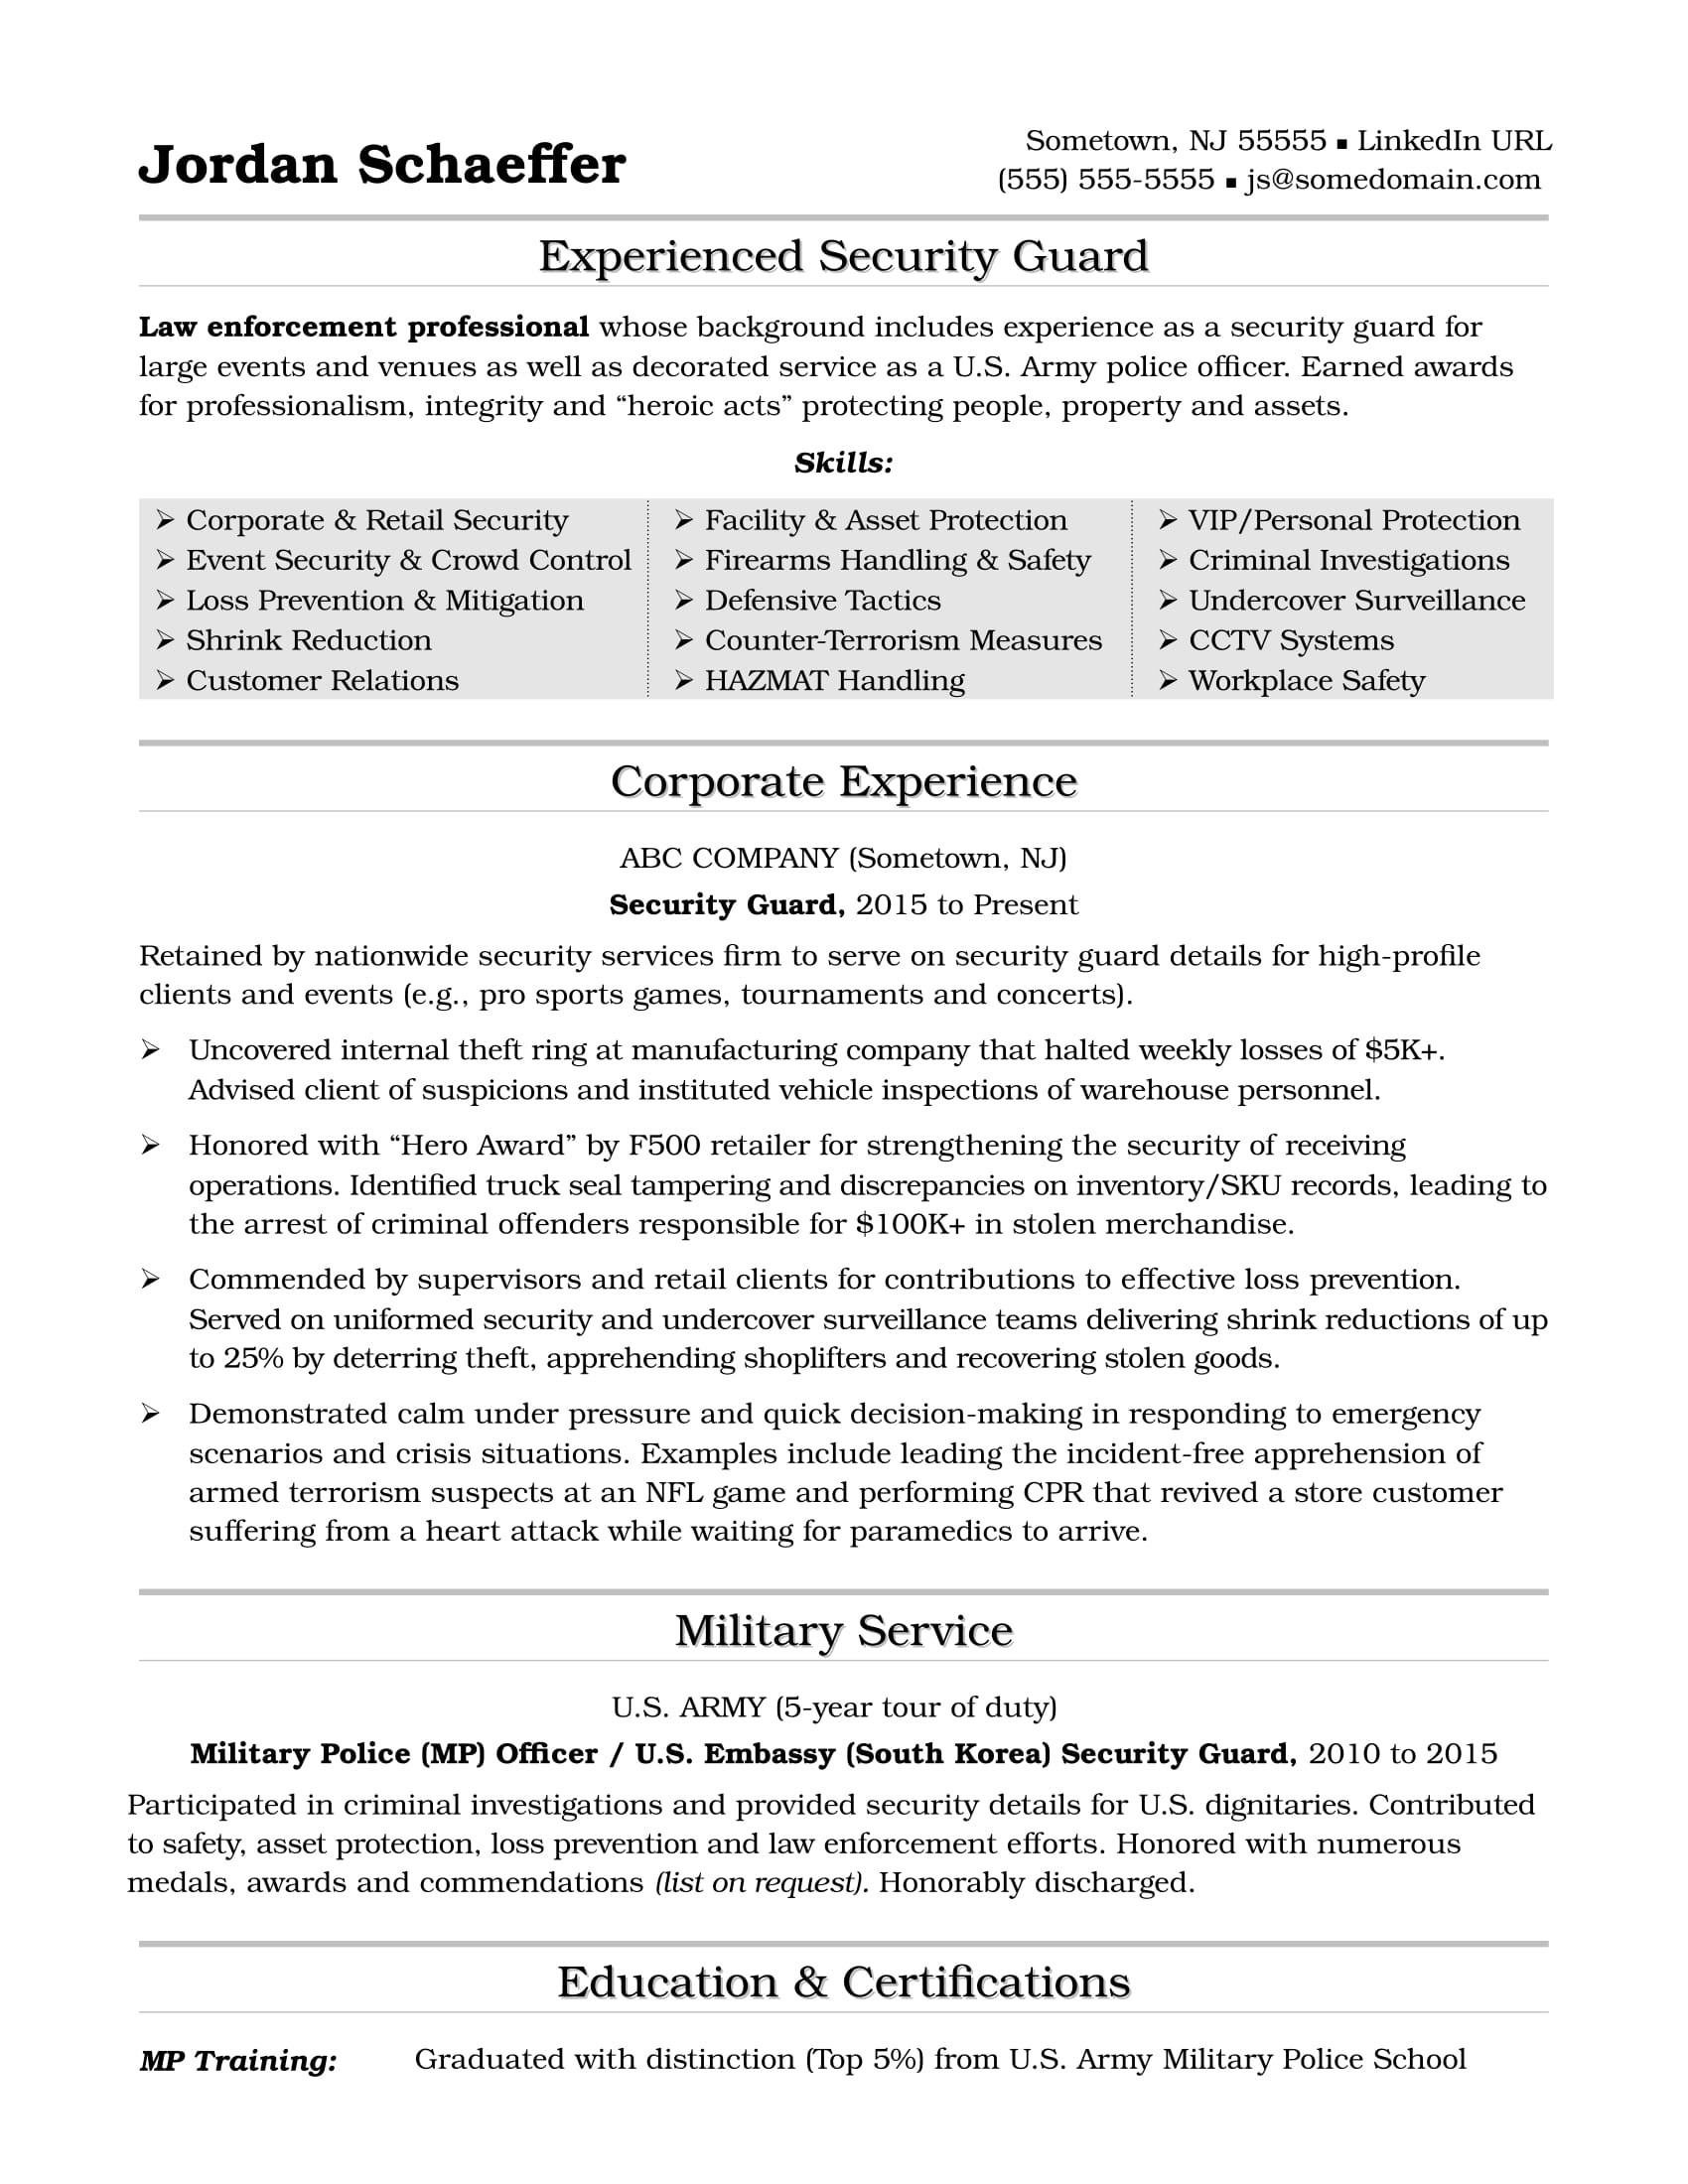 Sample Resume for Security Officer Position Security Guard Resume Sample Monster.com